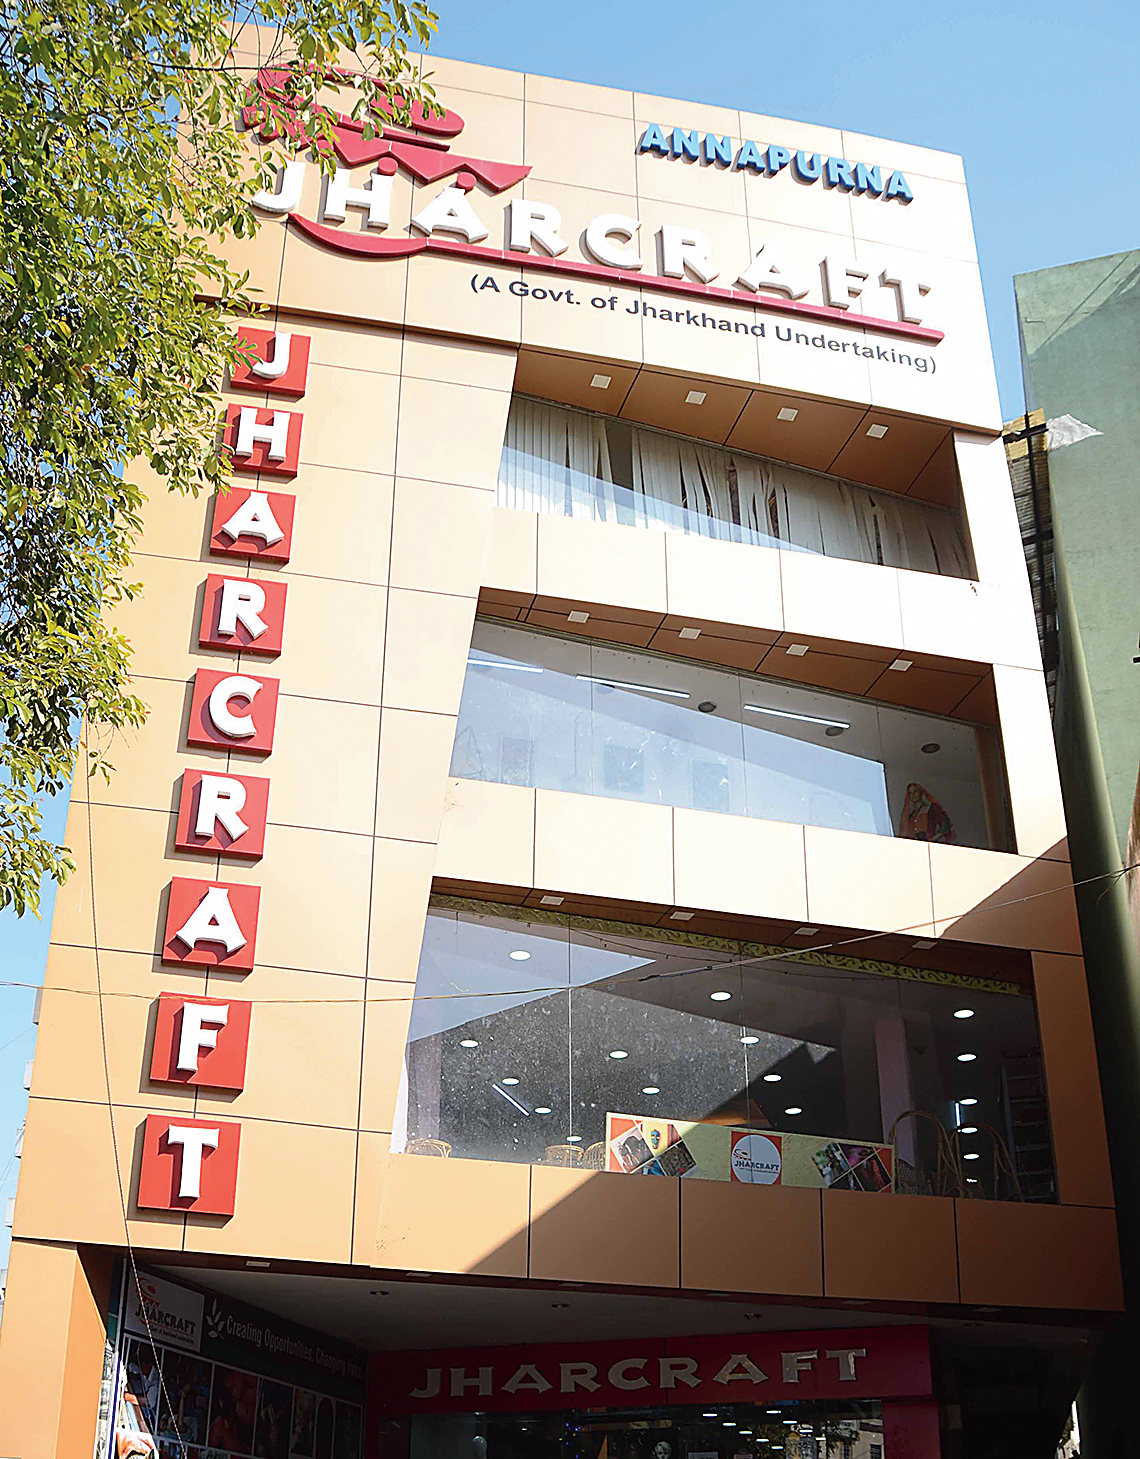 The Jharcraft store on Ratu Road in Ranchi. 
